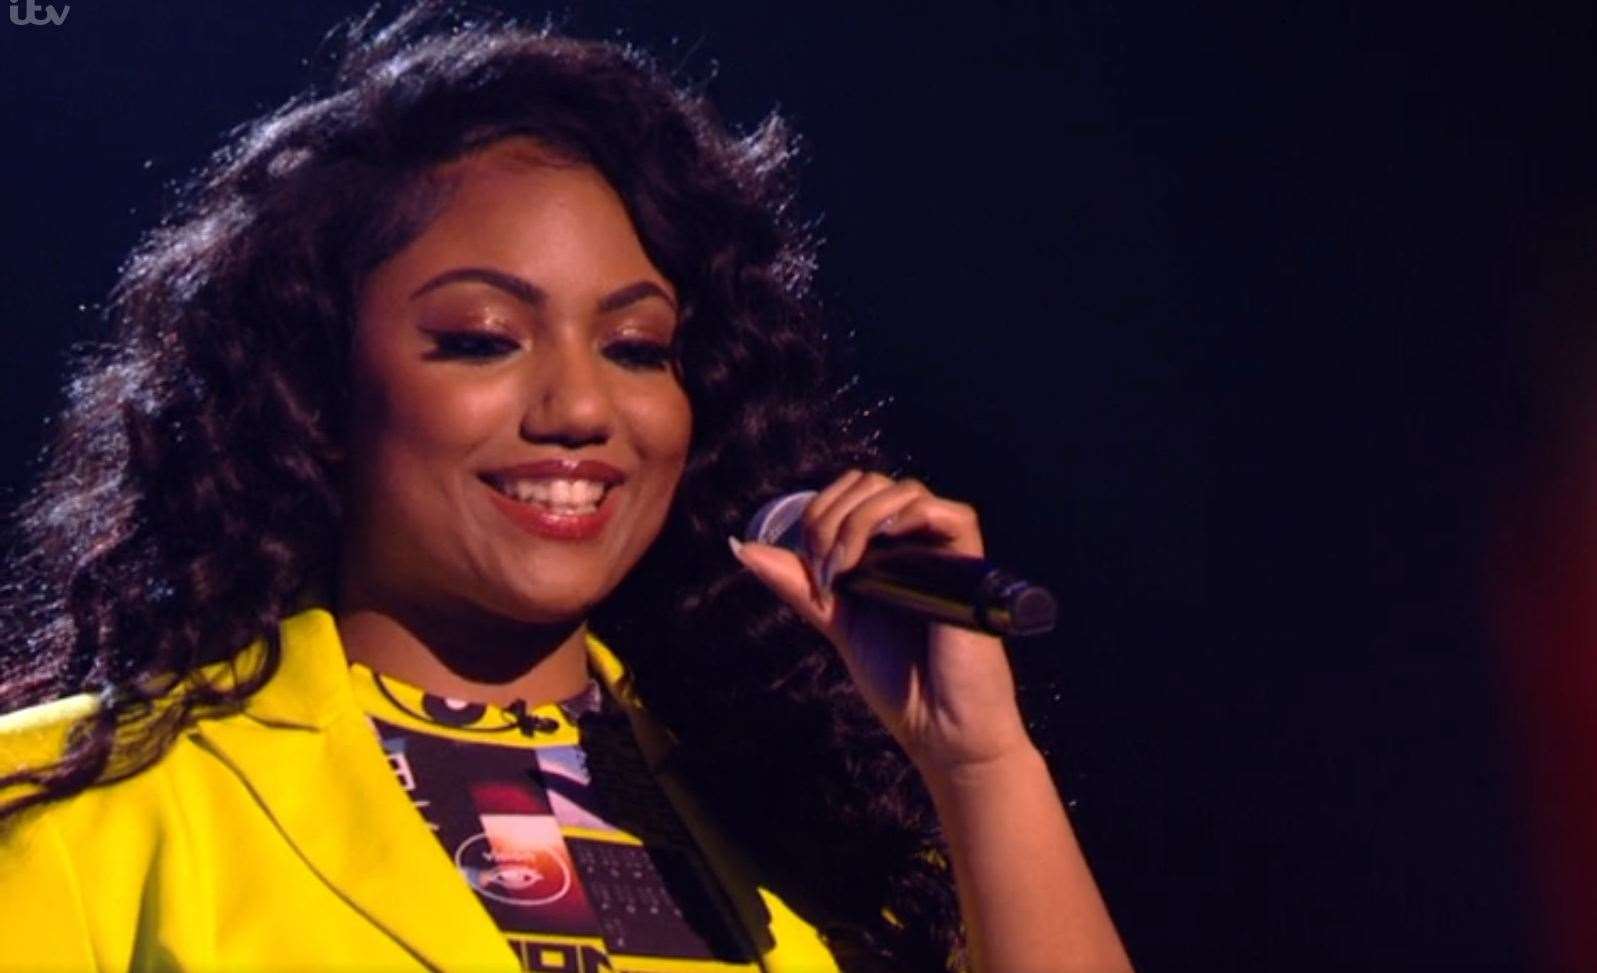 Blaize China performed on Saturday night. Picture: ITV